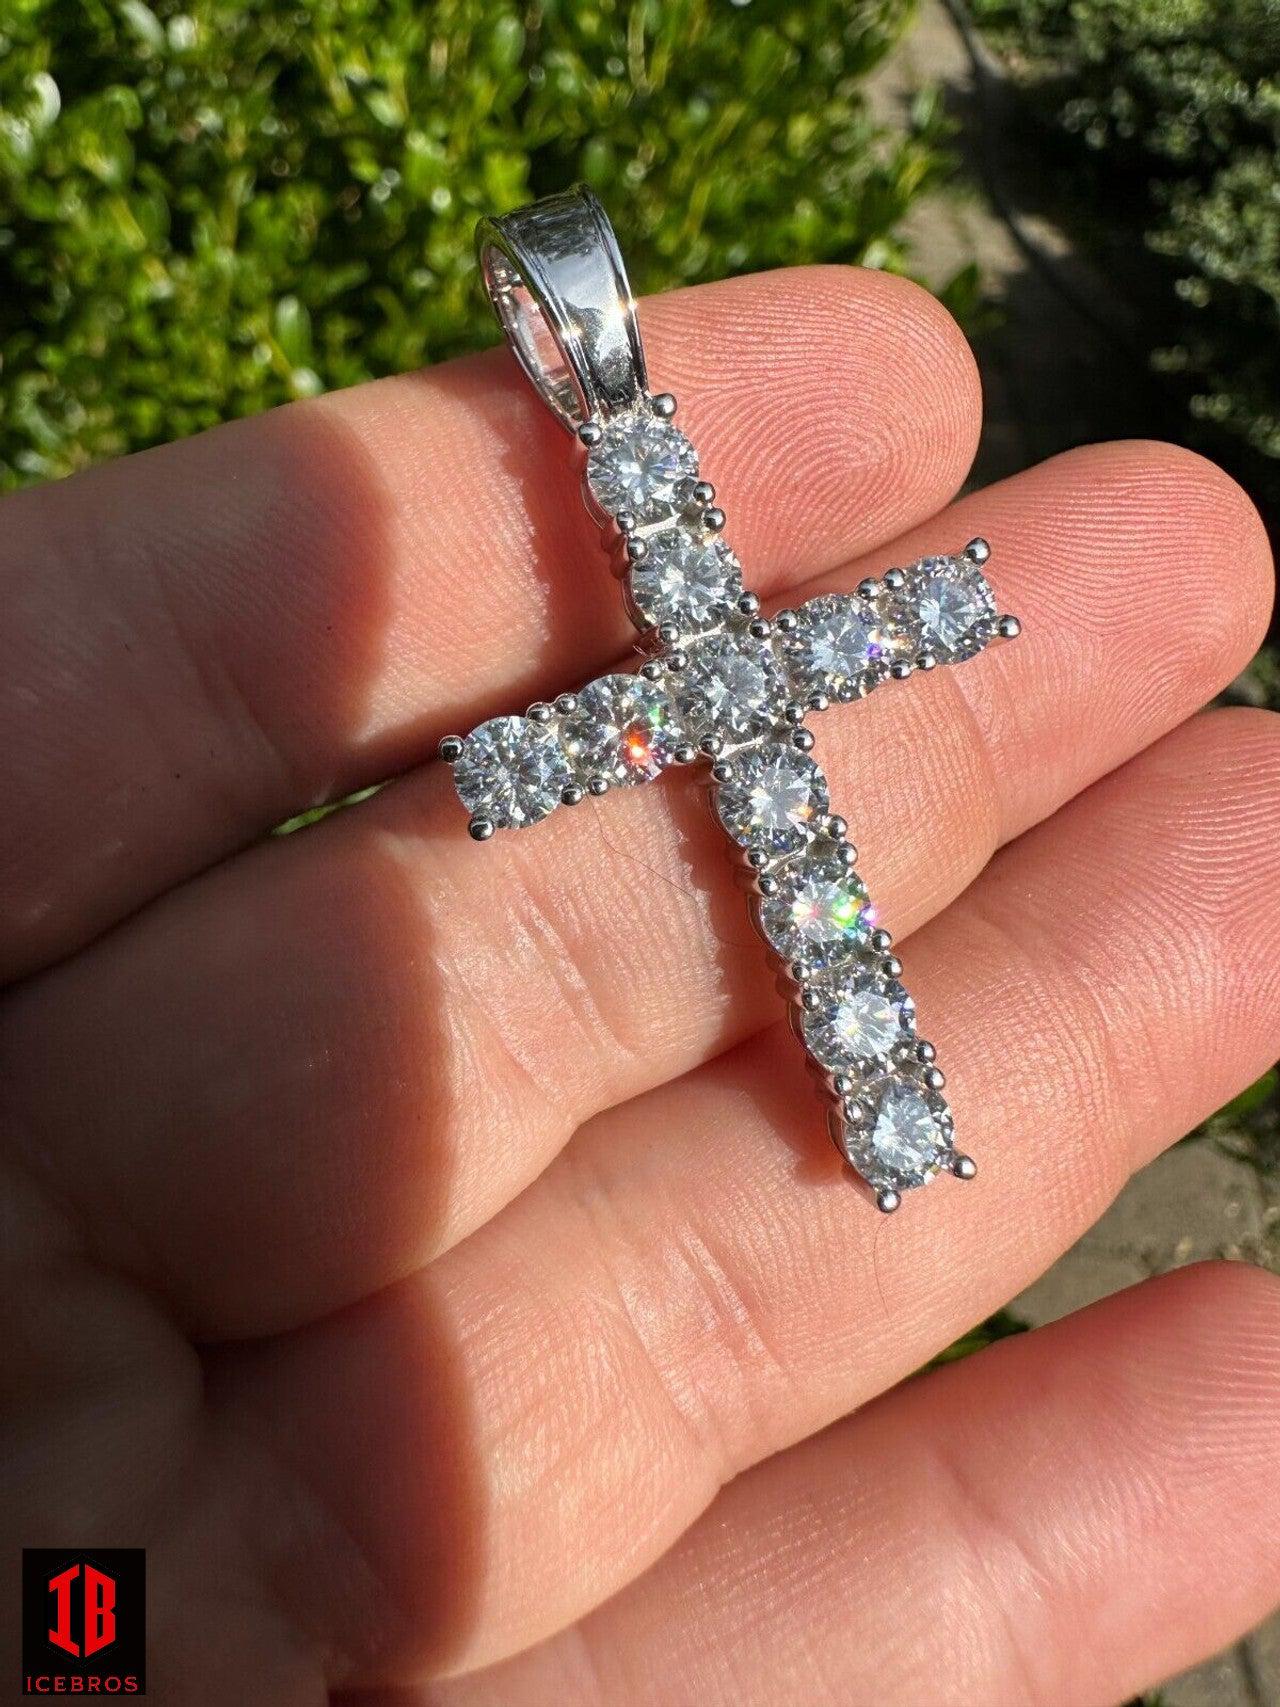 Real MOISSANITE Solid 10k White Gold Iced Tennis Cross Pendant Necklace 5 Sizes